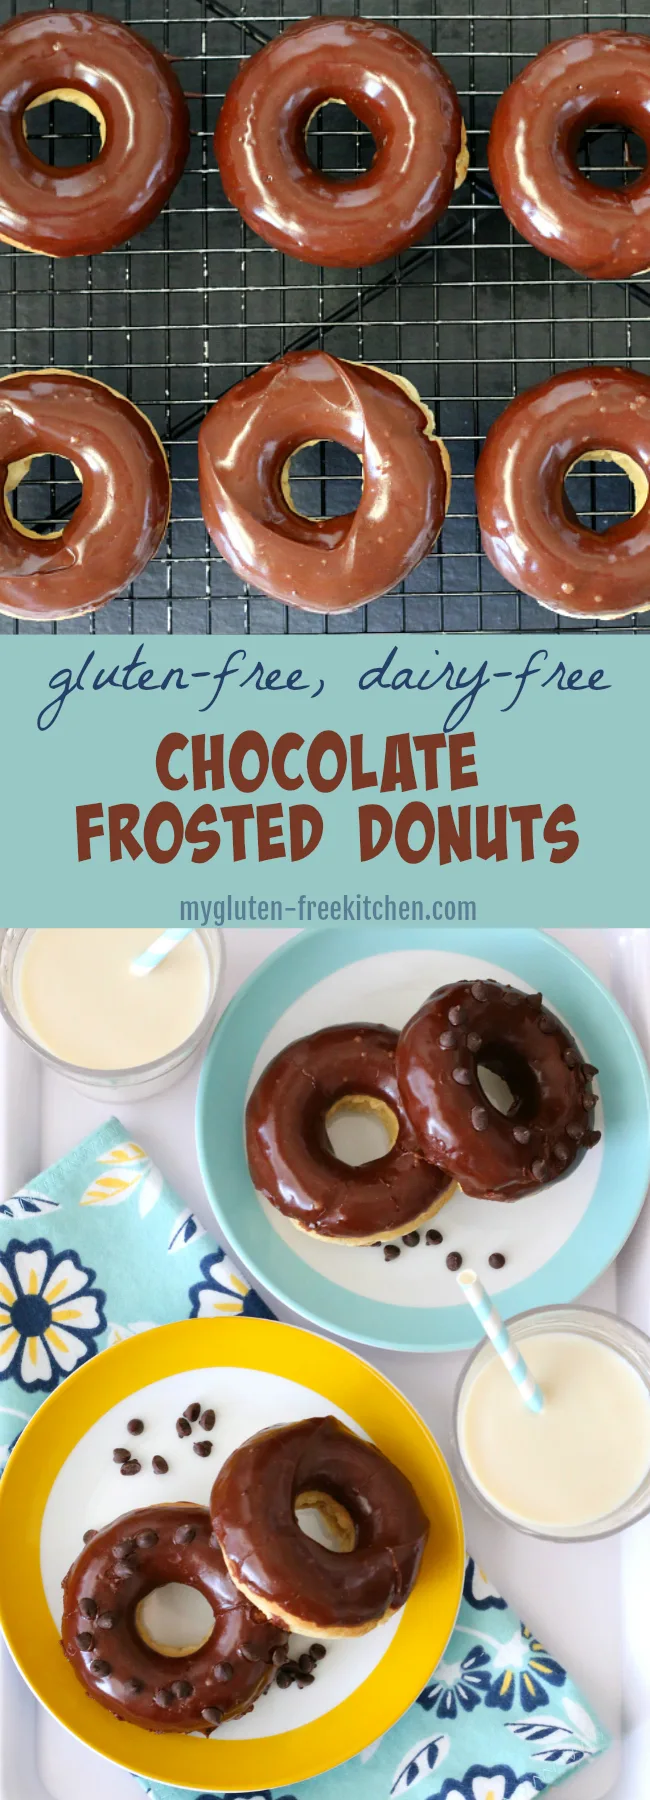 Gluten-free Chocolate Frosted Donuts Recipe that's dairy-free too! If you miss doughnuts, you've got to make these!